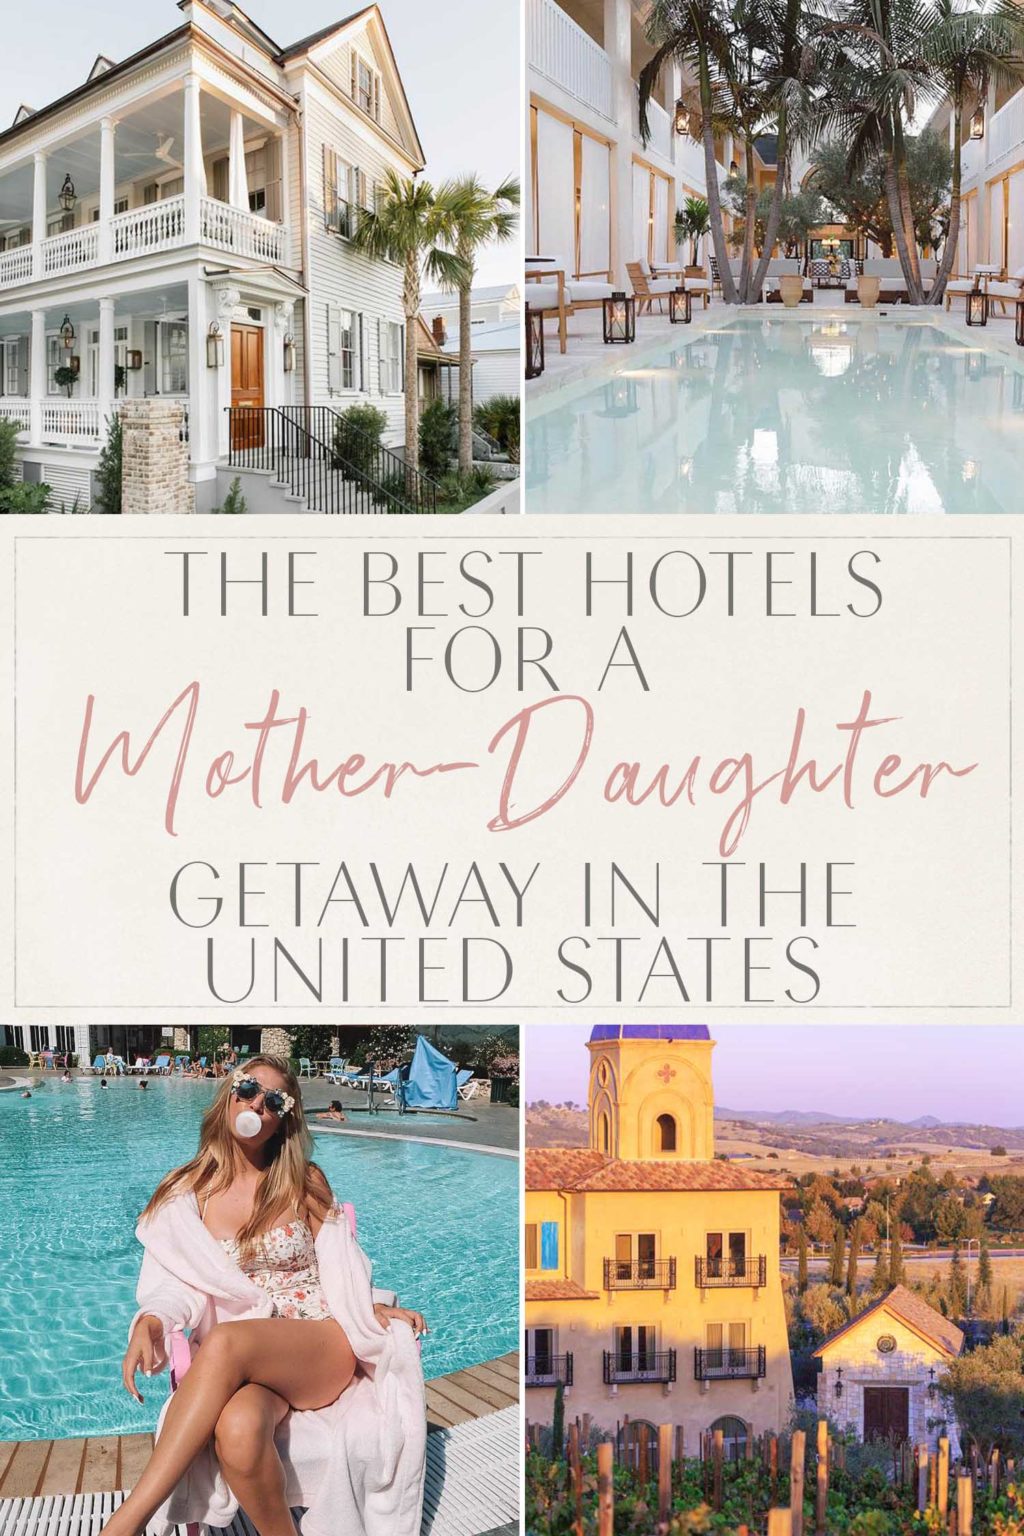 The Best Hotels for a MotherDaughter Getaway in the United States